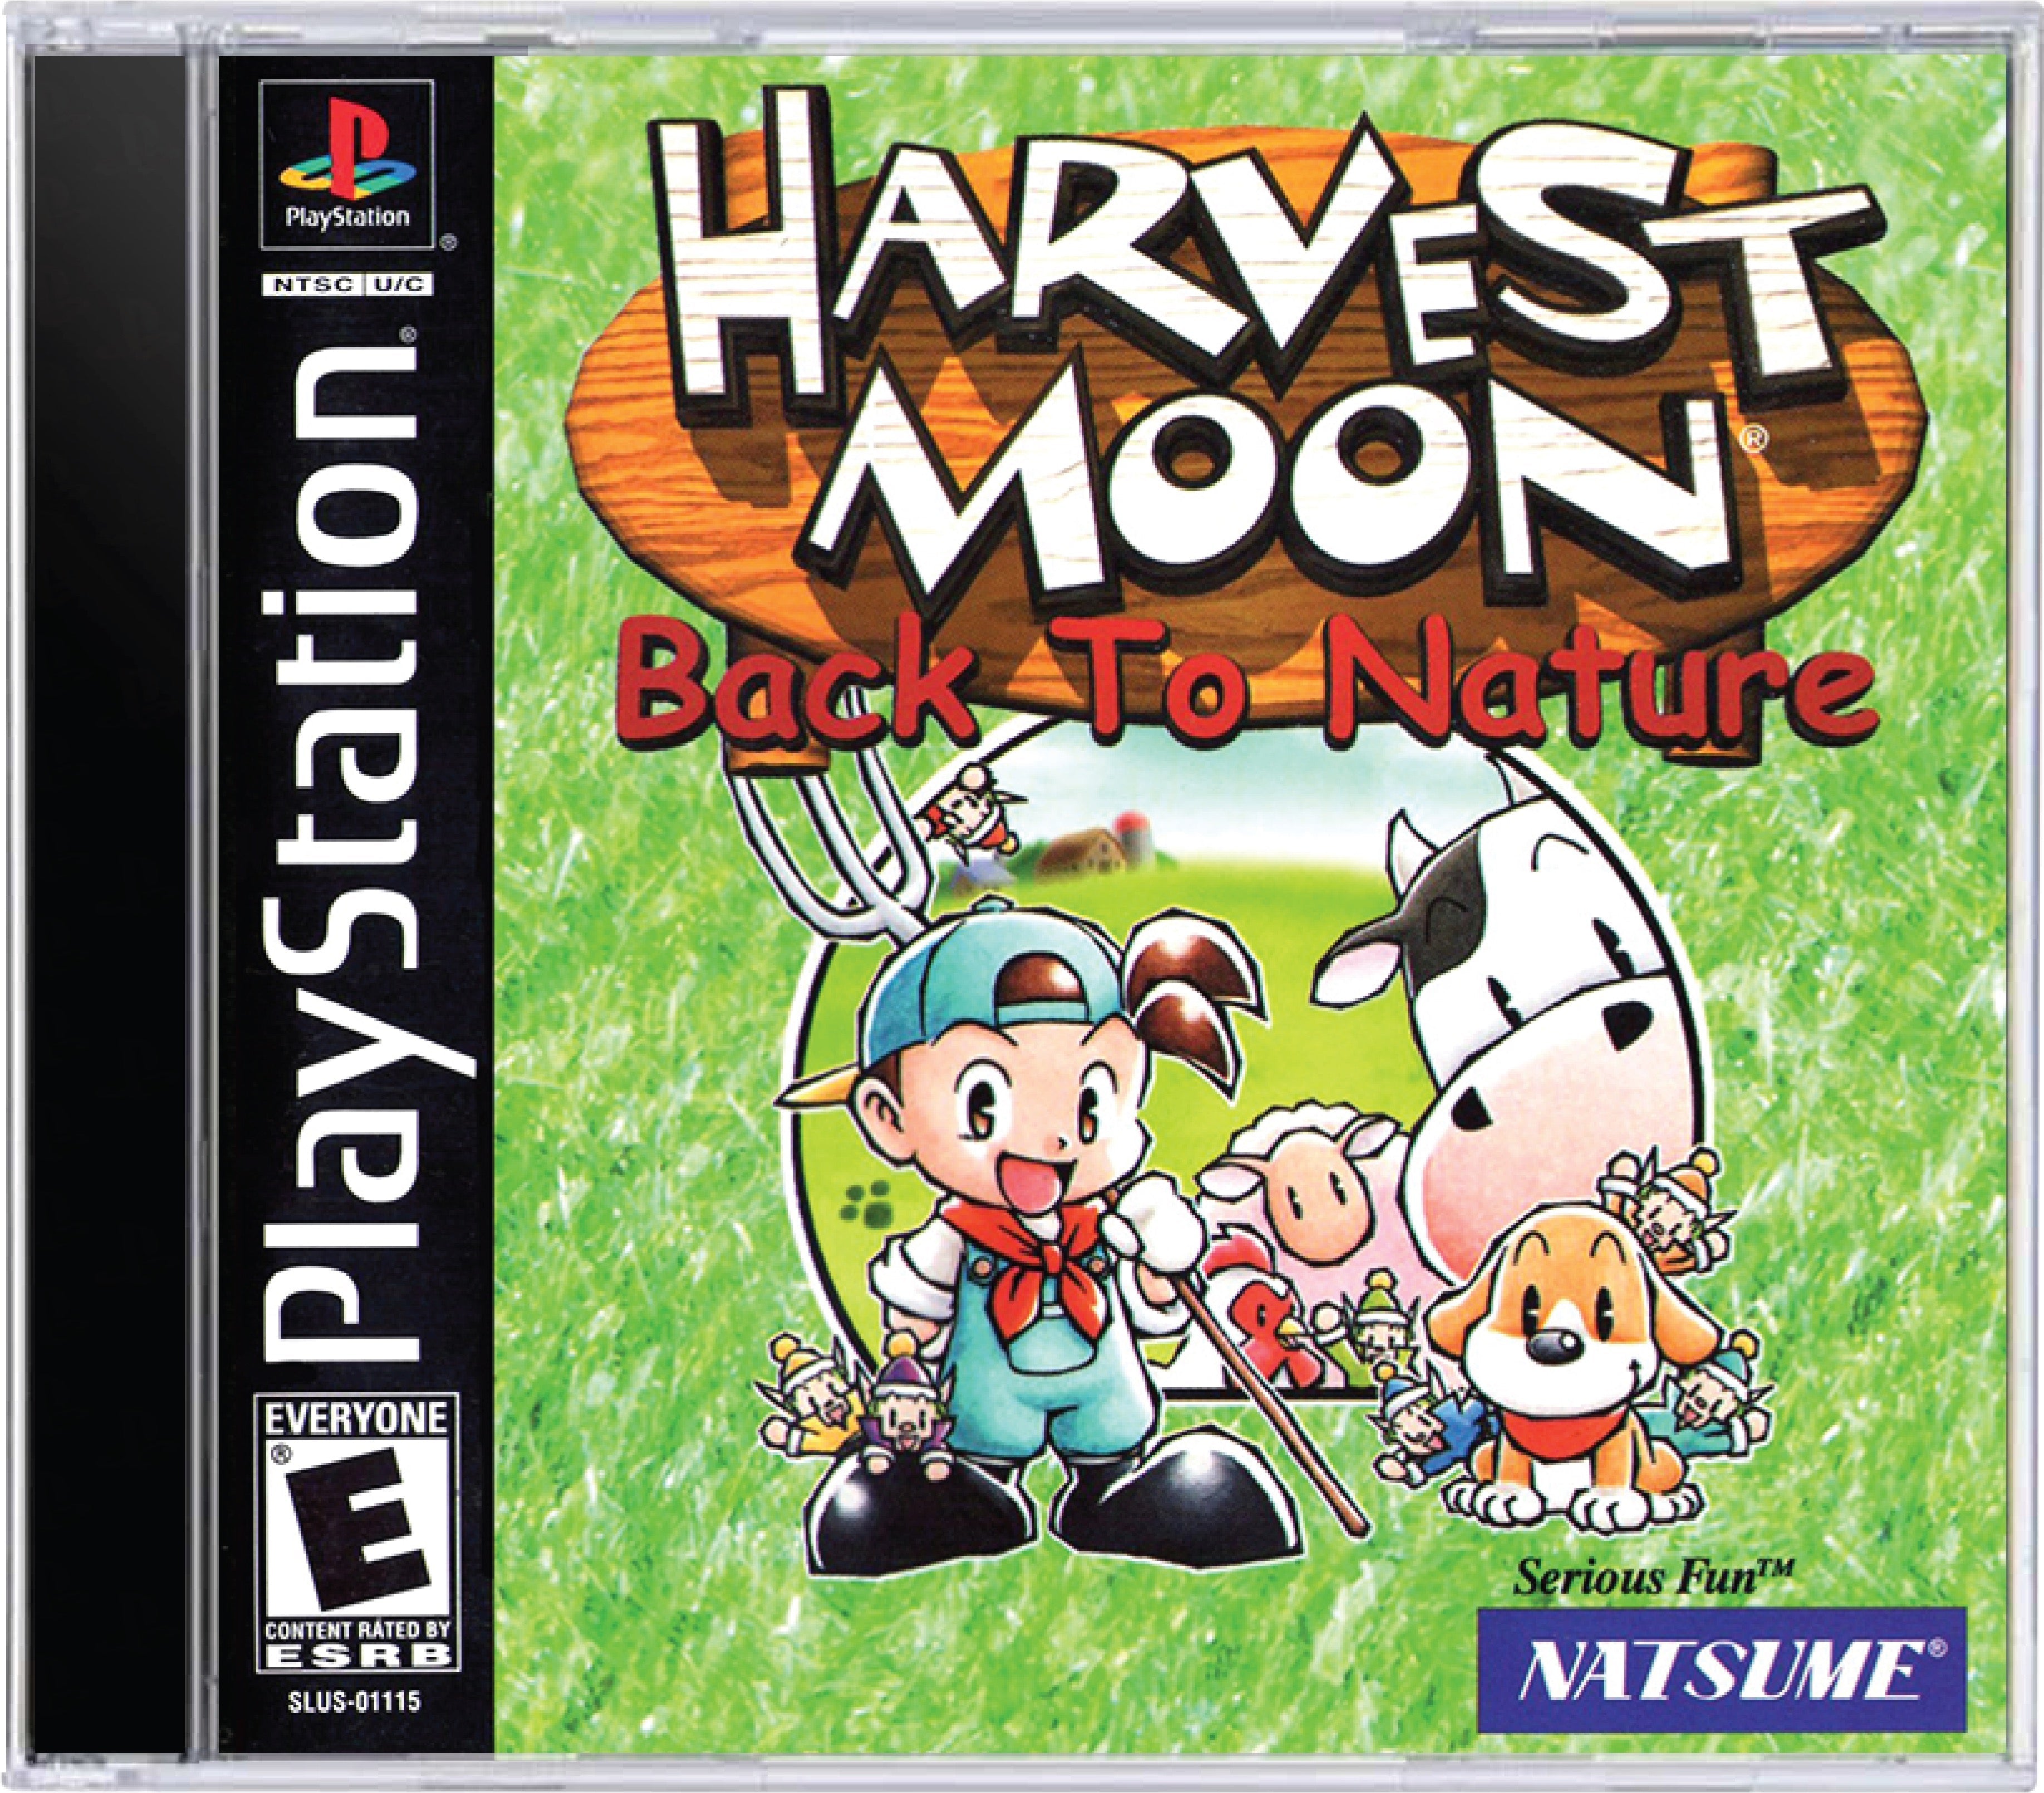 Harvest Moon Back to Nature Cover Art and Product Photo